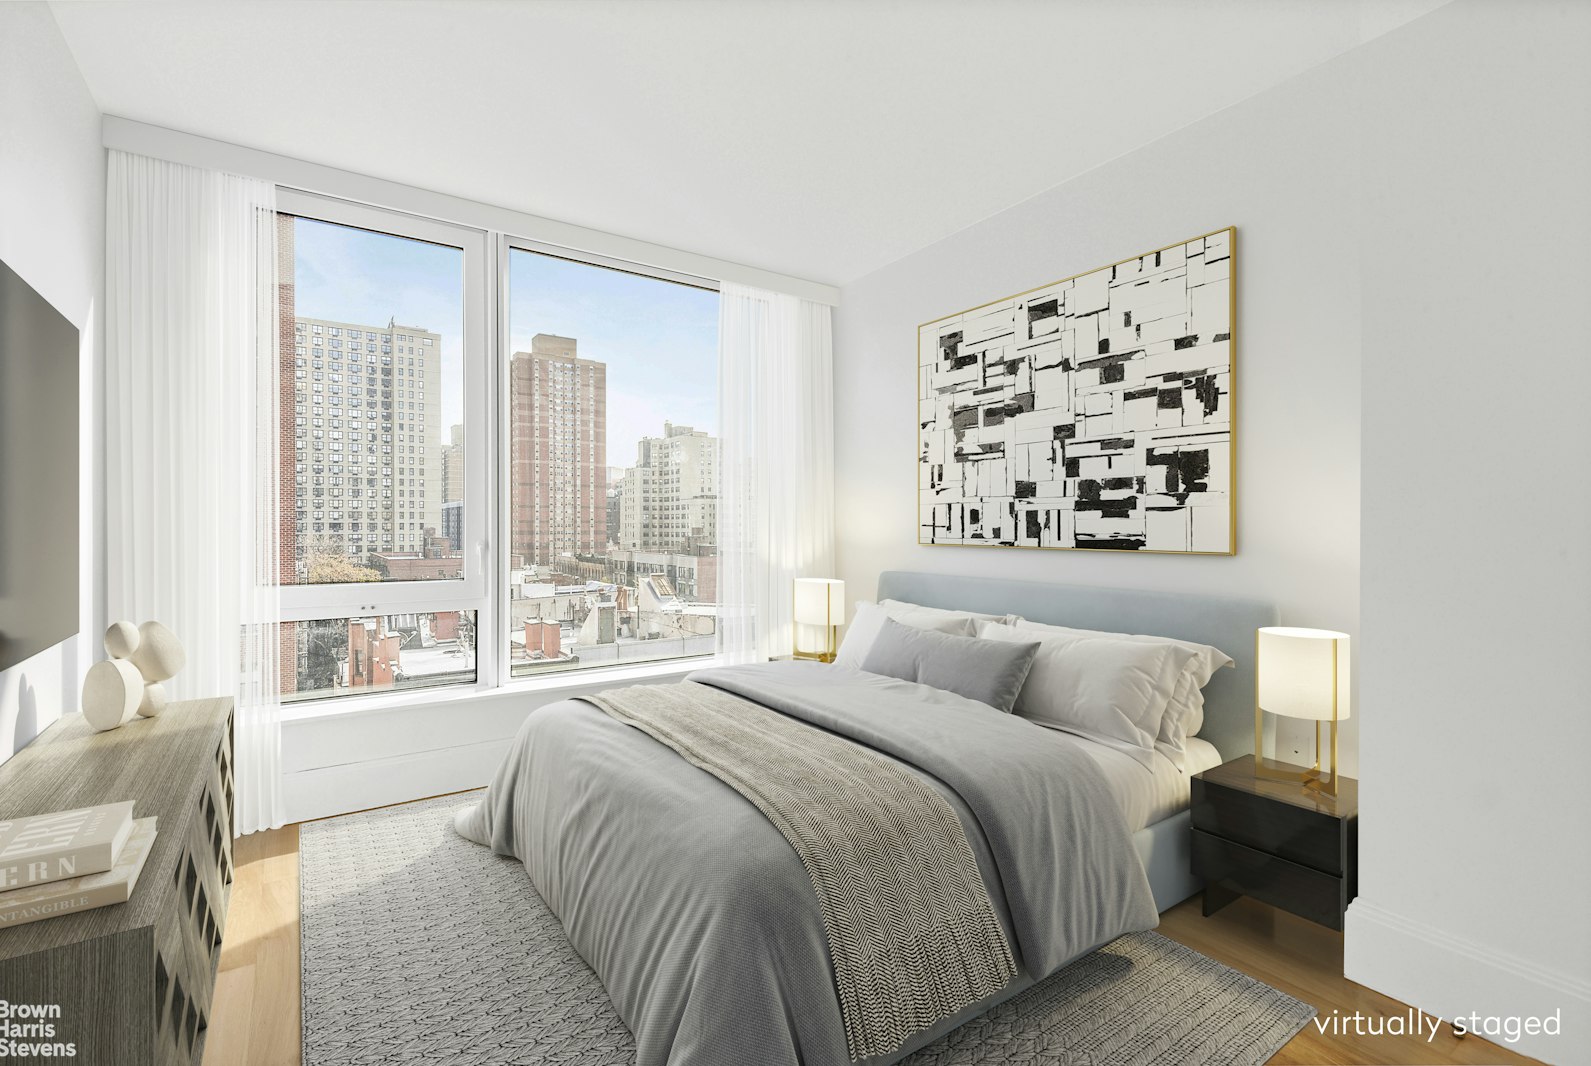 368 3rd Avenue 9A, Gramercy Park And Murray Hill, Downtown, NYC - 3 Bedrooms  
2.5 Bathrooms  
5 Rooms - 